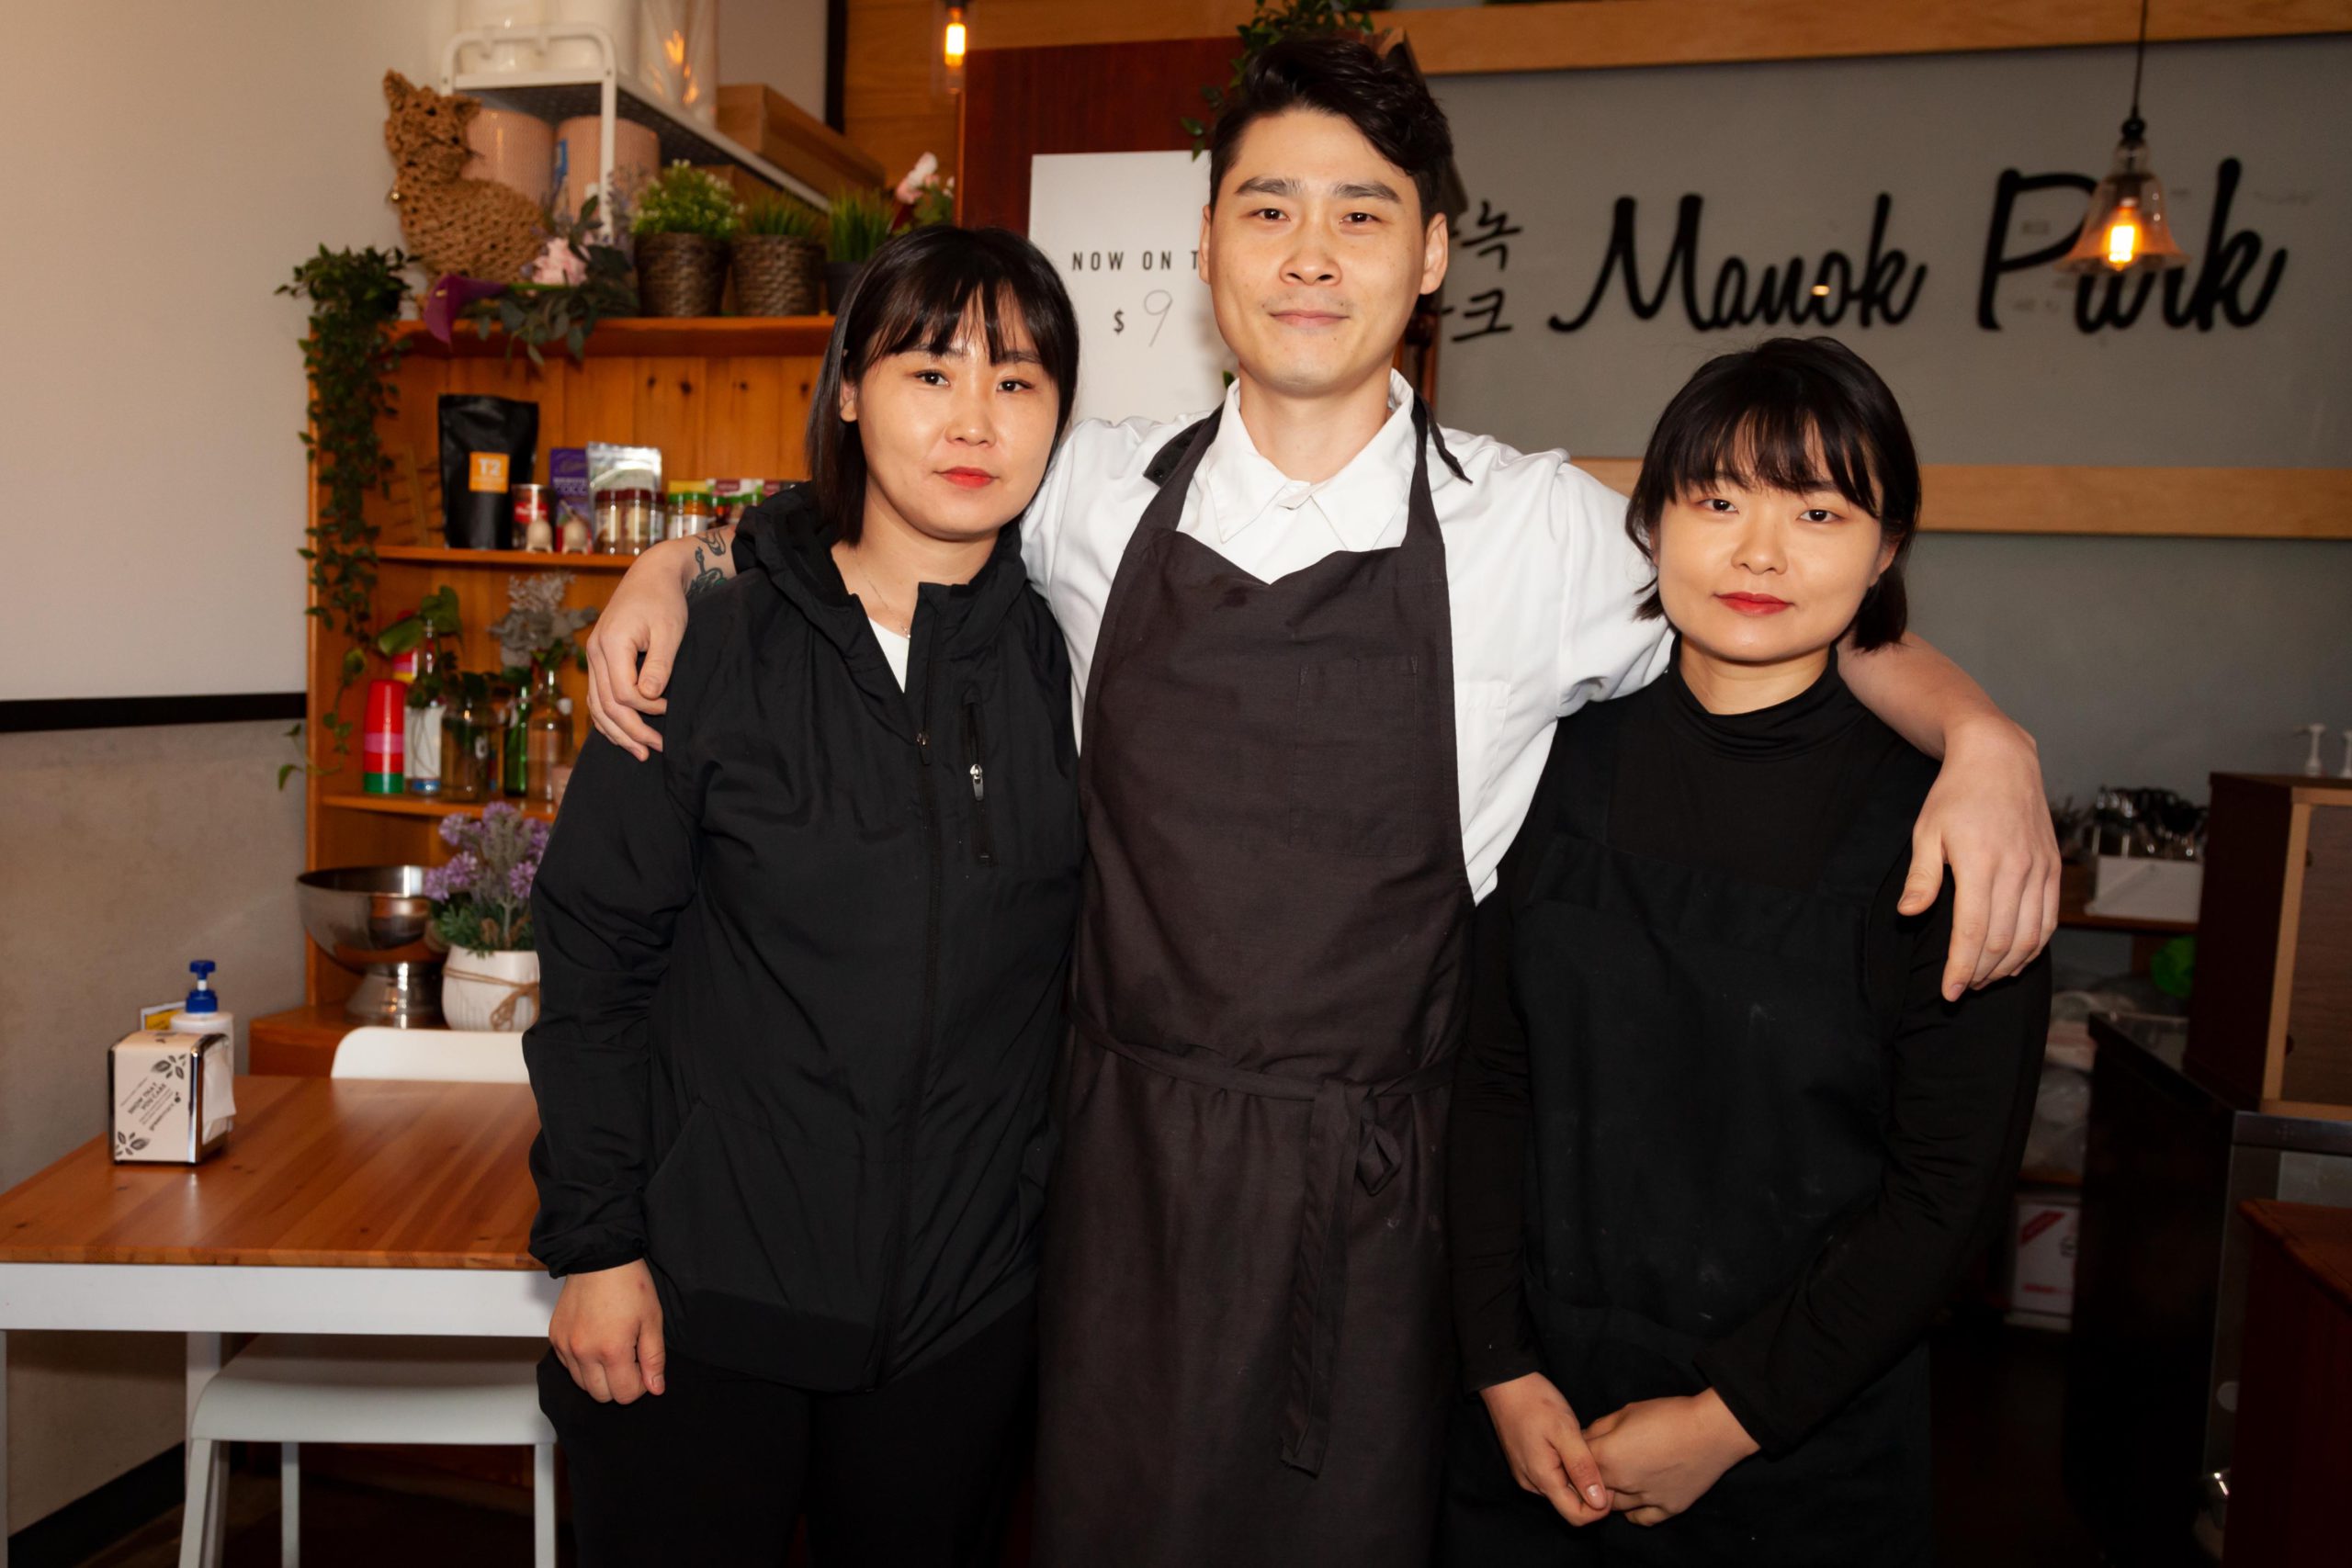 Chef Sean Hwang with sisters Victoria and June